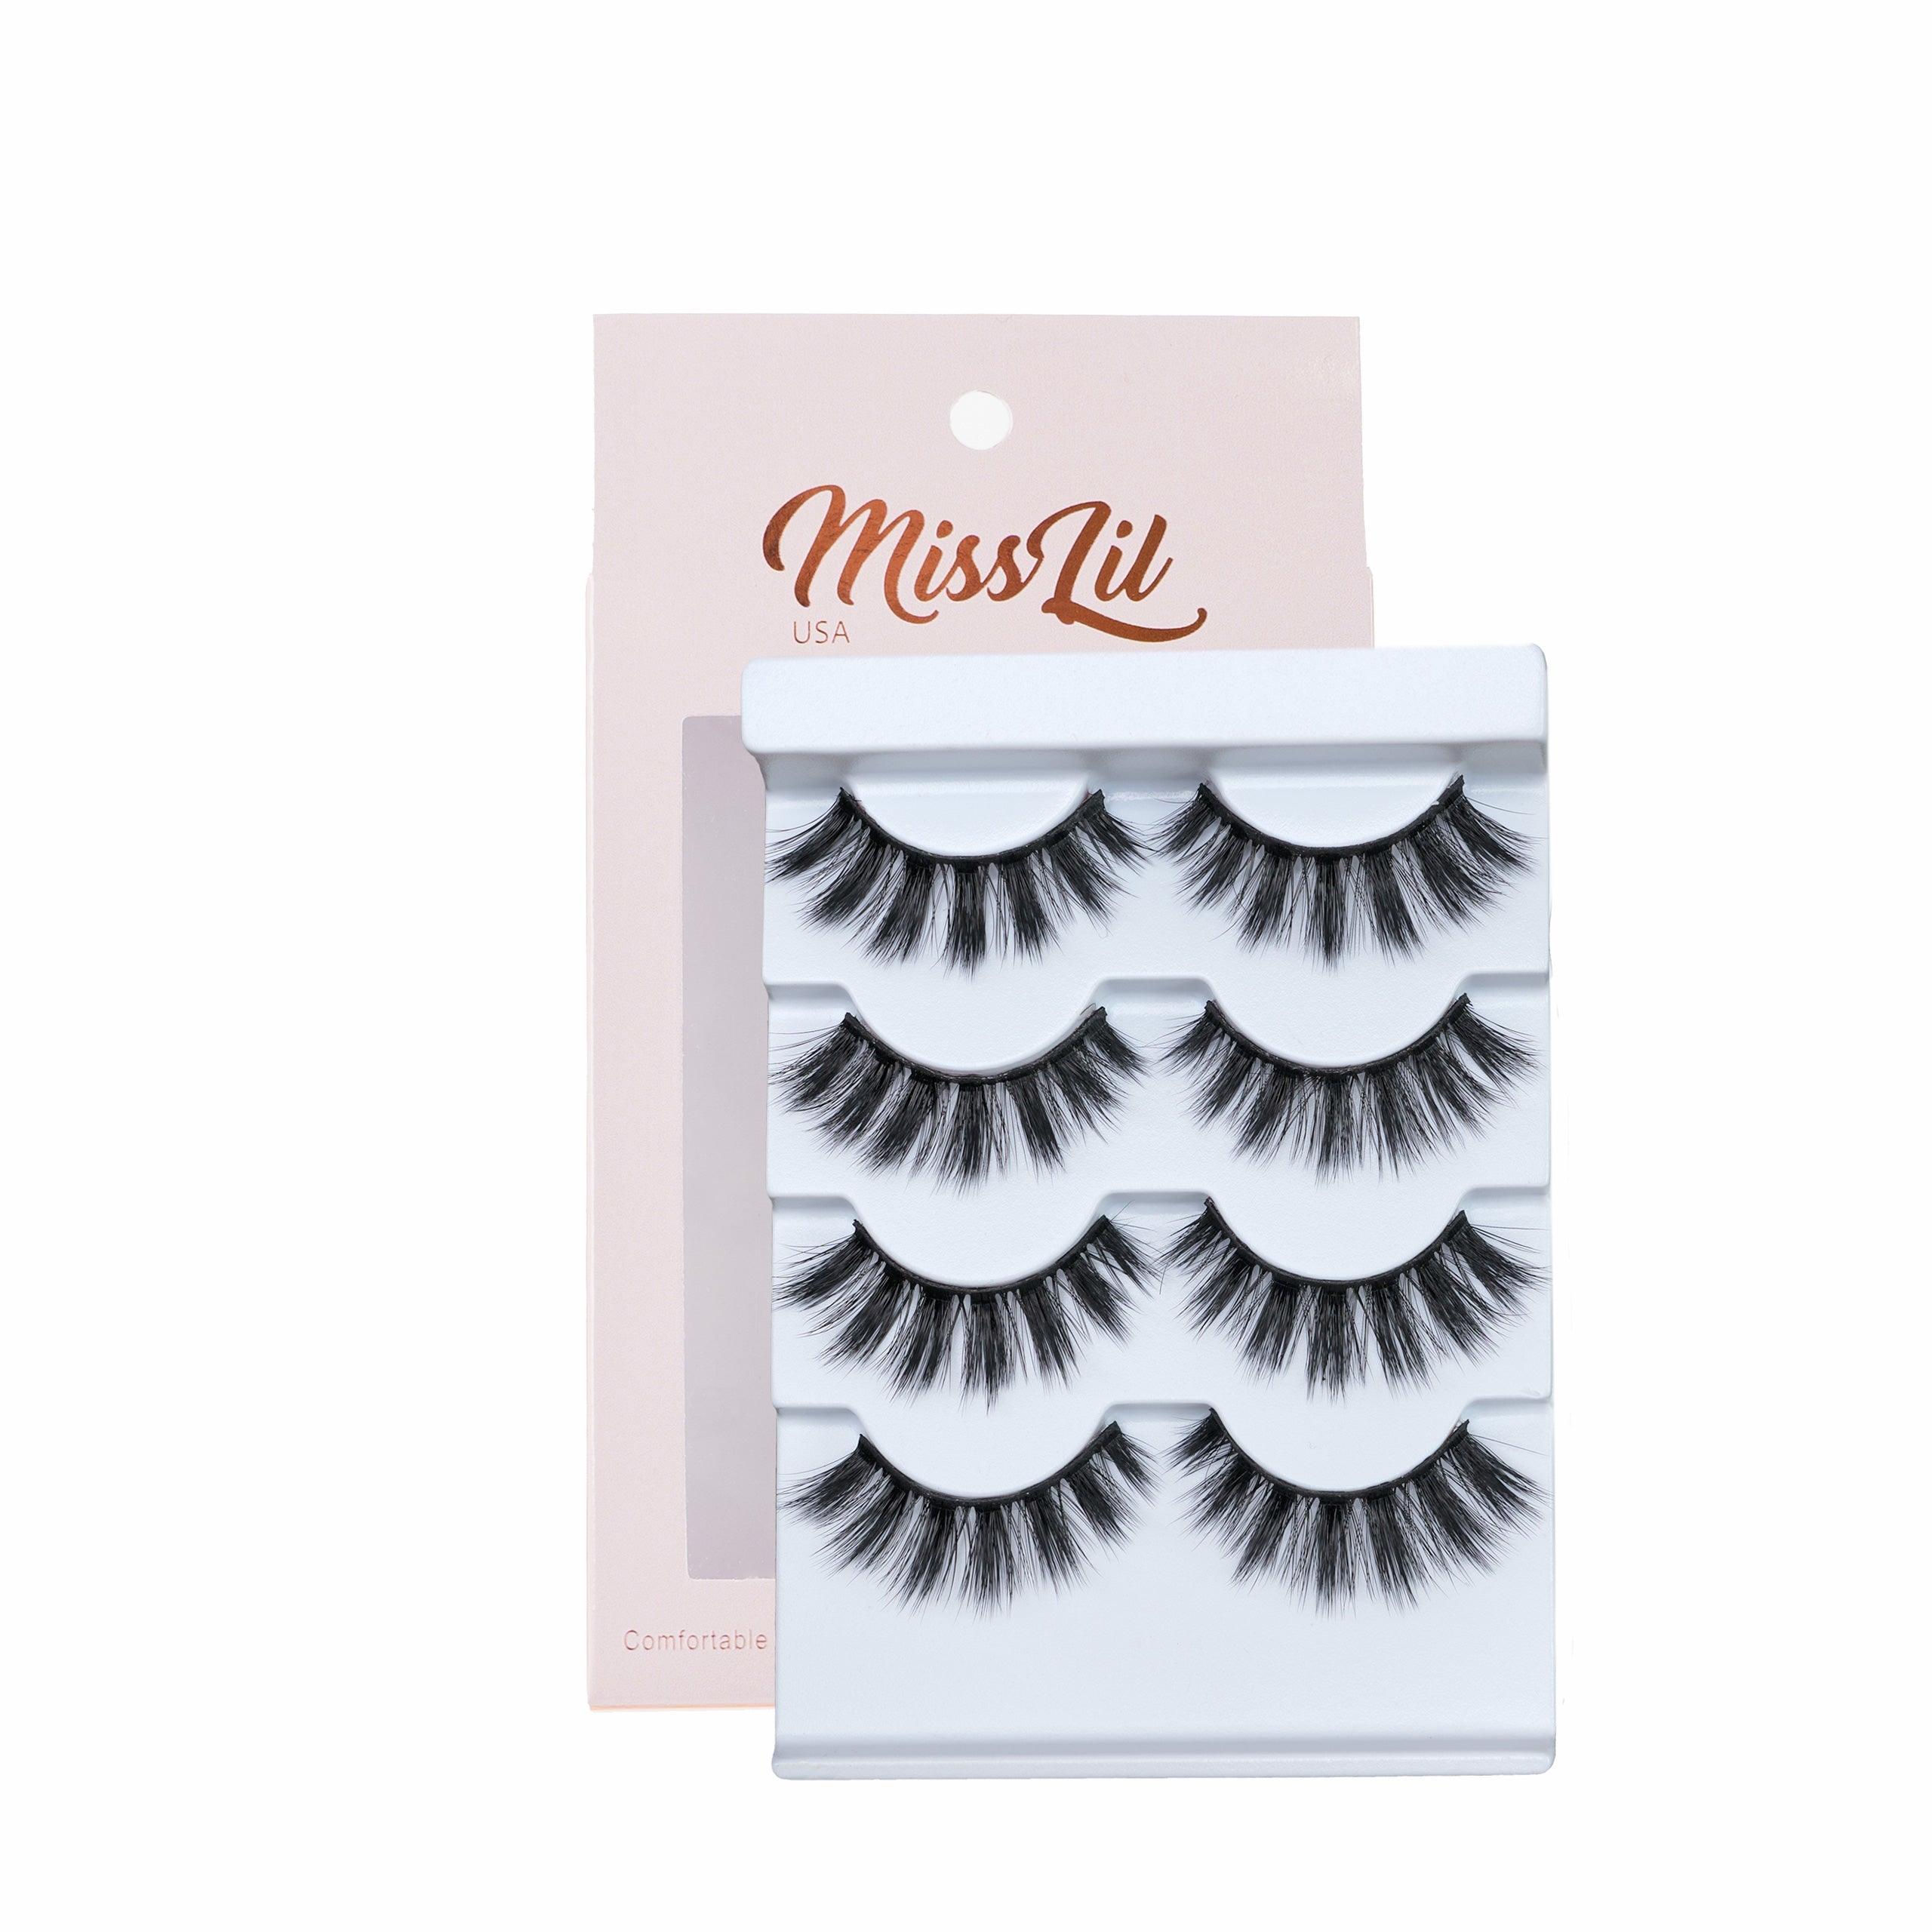 4 Pairs Lashes - Classic Collection #27 - Miss Lil USA